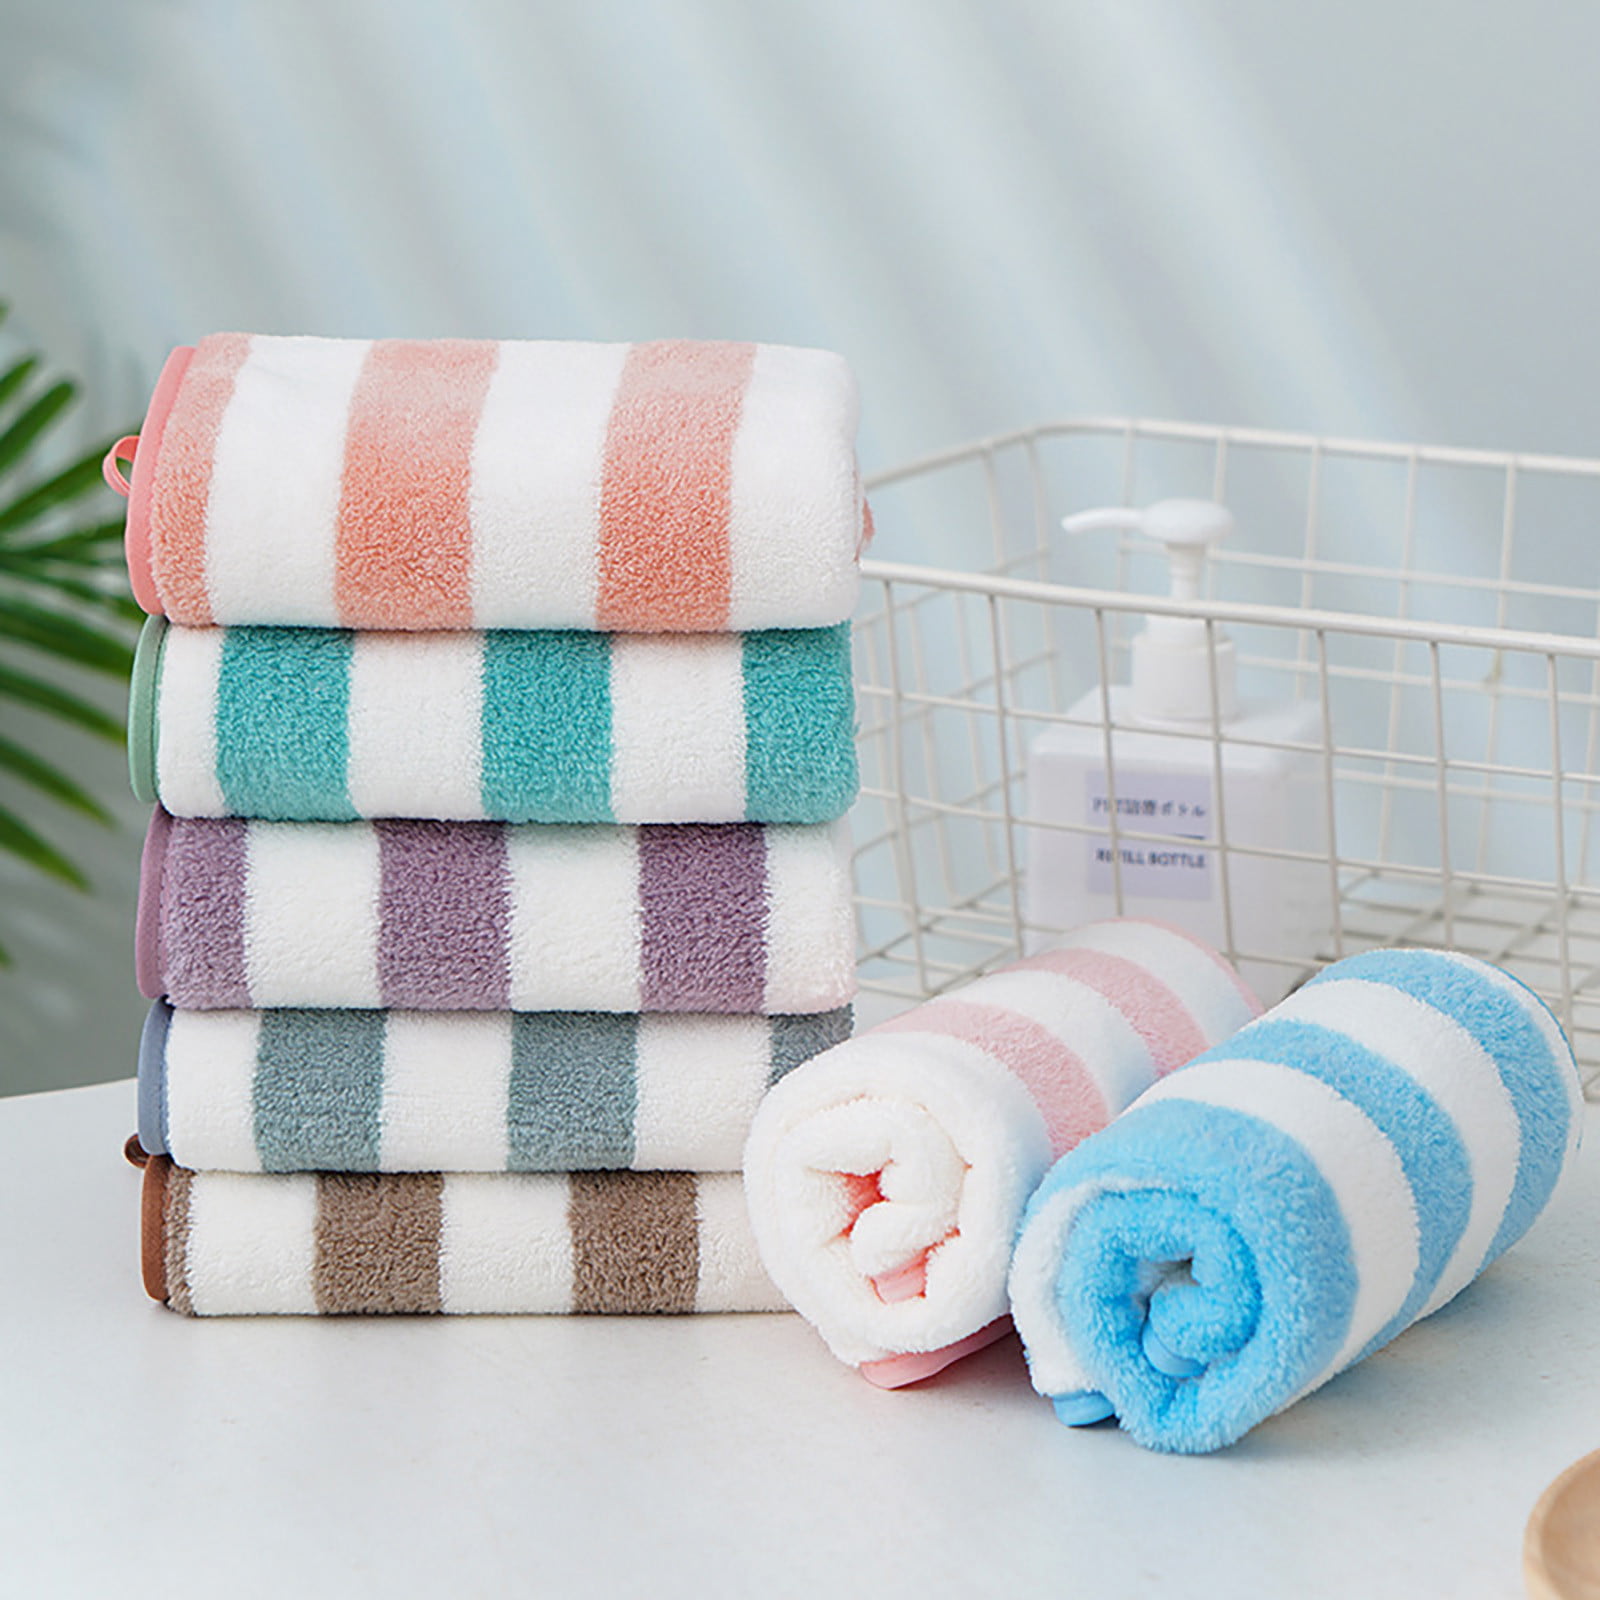 2pcs Kitchen Hand Towels,Hanging Towel For Wiping Hands,Highly Absorbent &  Quick Drying Dish Towels,Super Absorbent and Lint Free Towels For  bathroom,Washroom Hand Towels